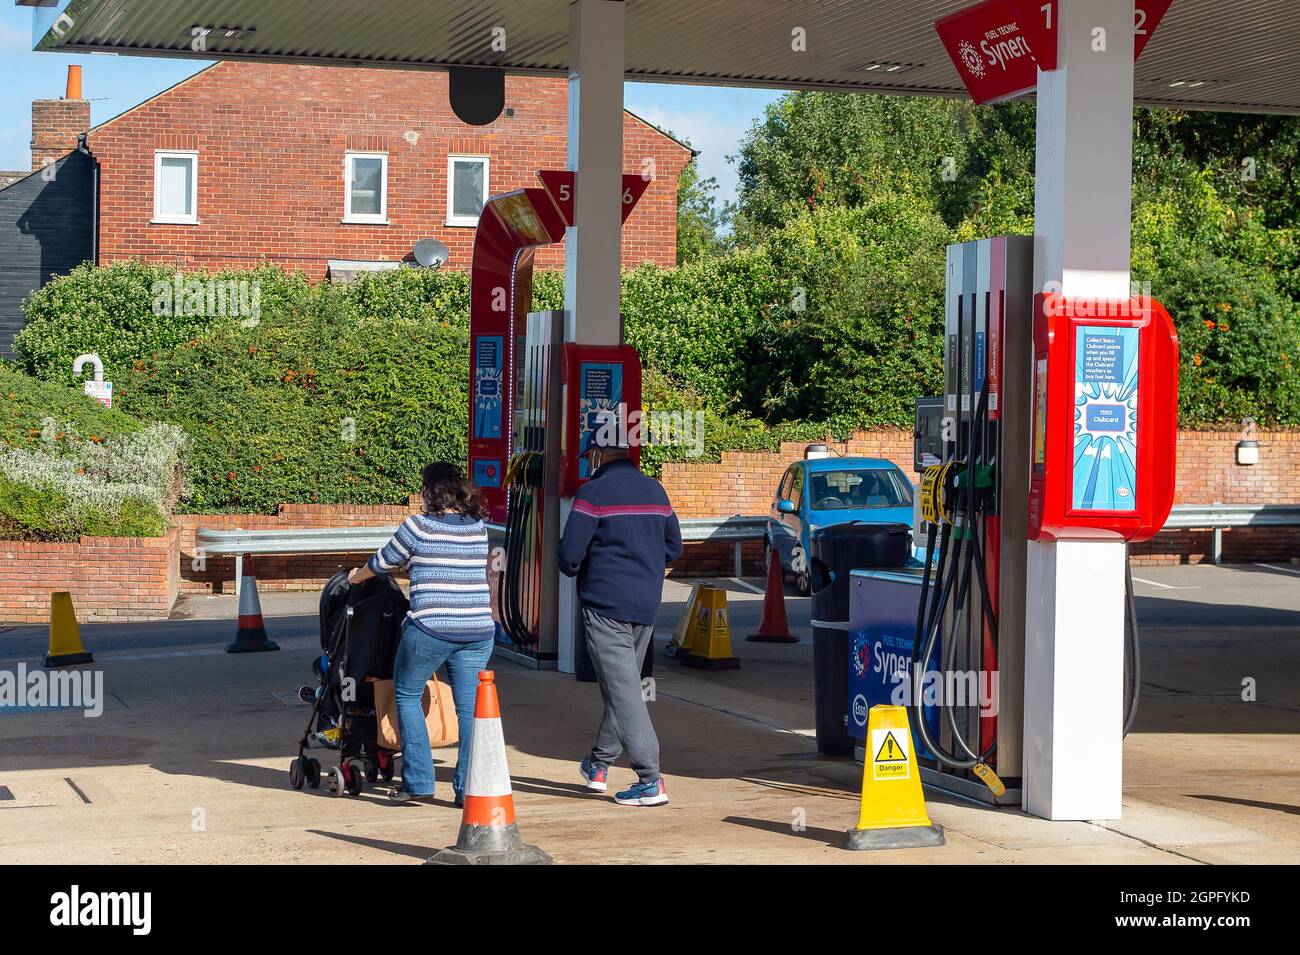 Chalfont St Peter, Buckinghamshire, UK. 29th September, 2021. The Esso garage in Chalfont St Peter had run dry of fuel today and only the shop was open. Panic buying of petrol and diesel has continued over the past few days due to a shortage of drivers making fuel deliveries following Brexit and the Covid-19 Pandemic. Credit: Maureen McLean/Alamy Live News Stock Photo